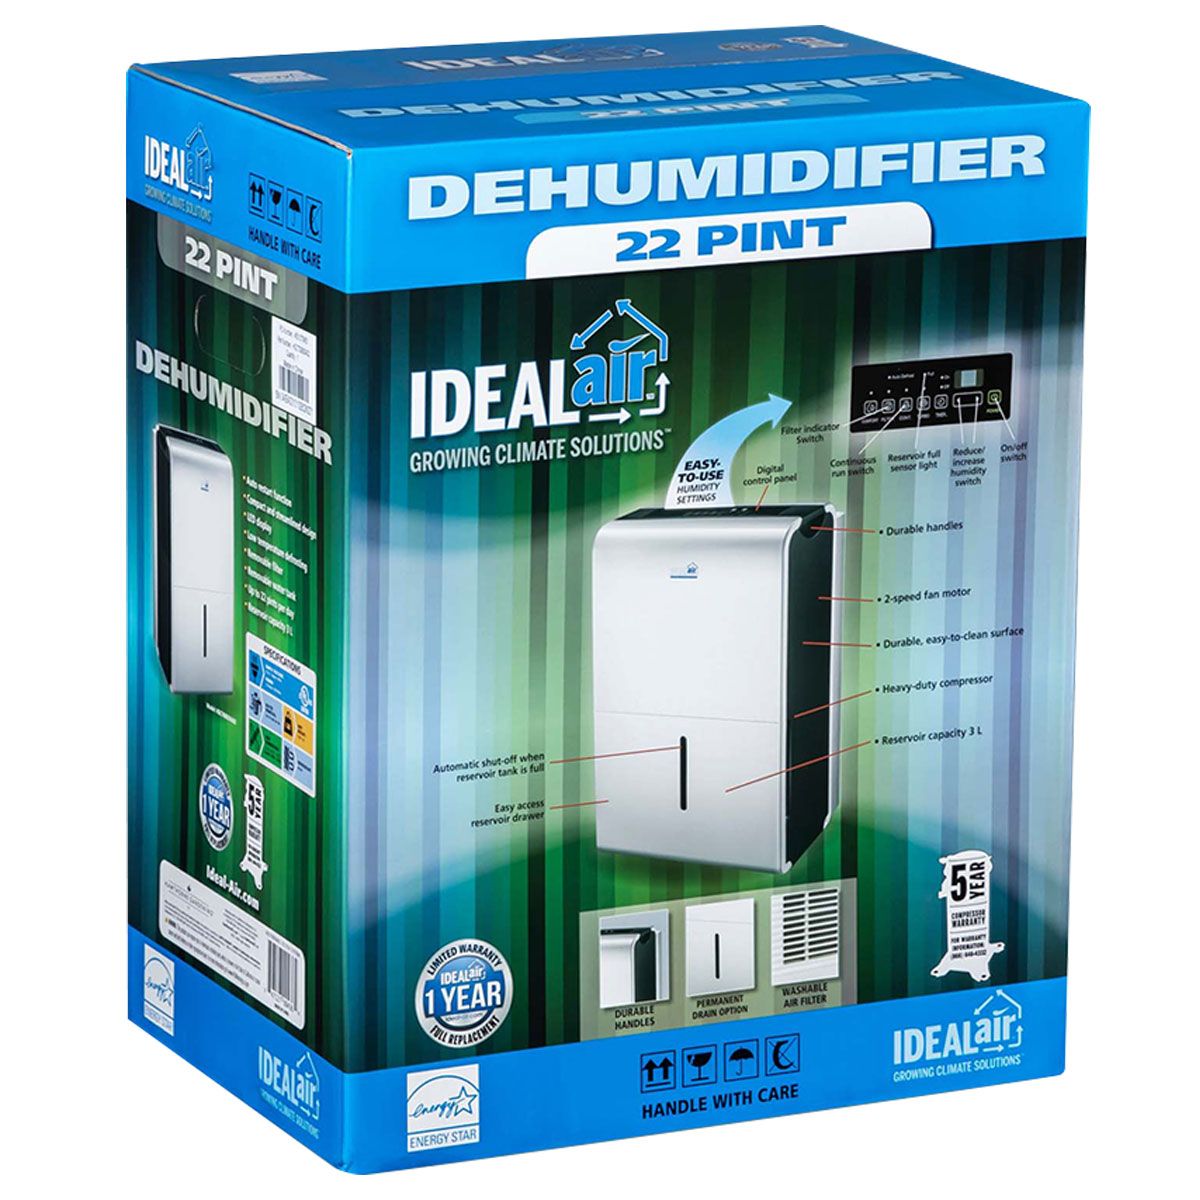 Product Secondary Image:Ideal-Air Dehumidifier 22 Pint